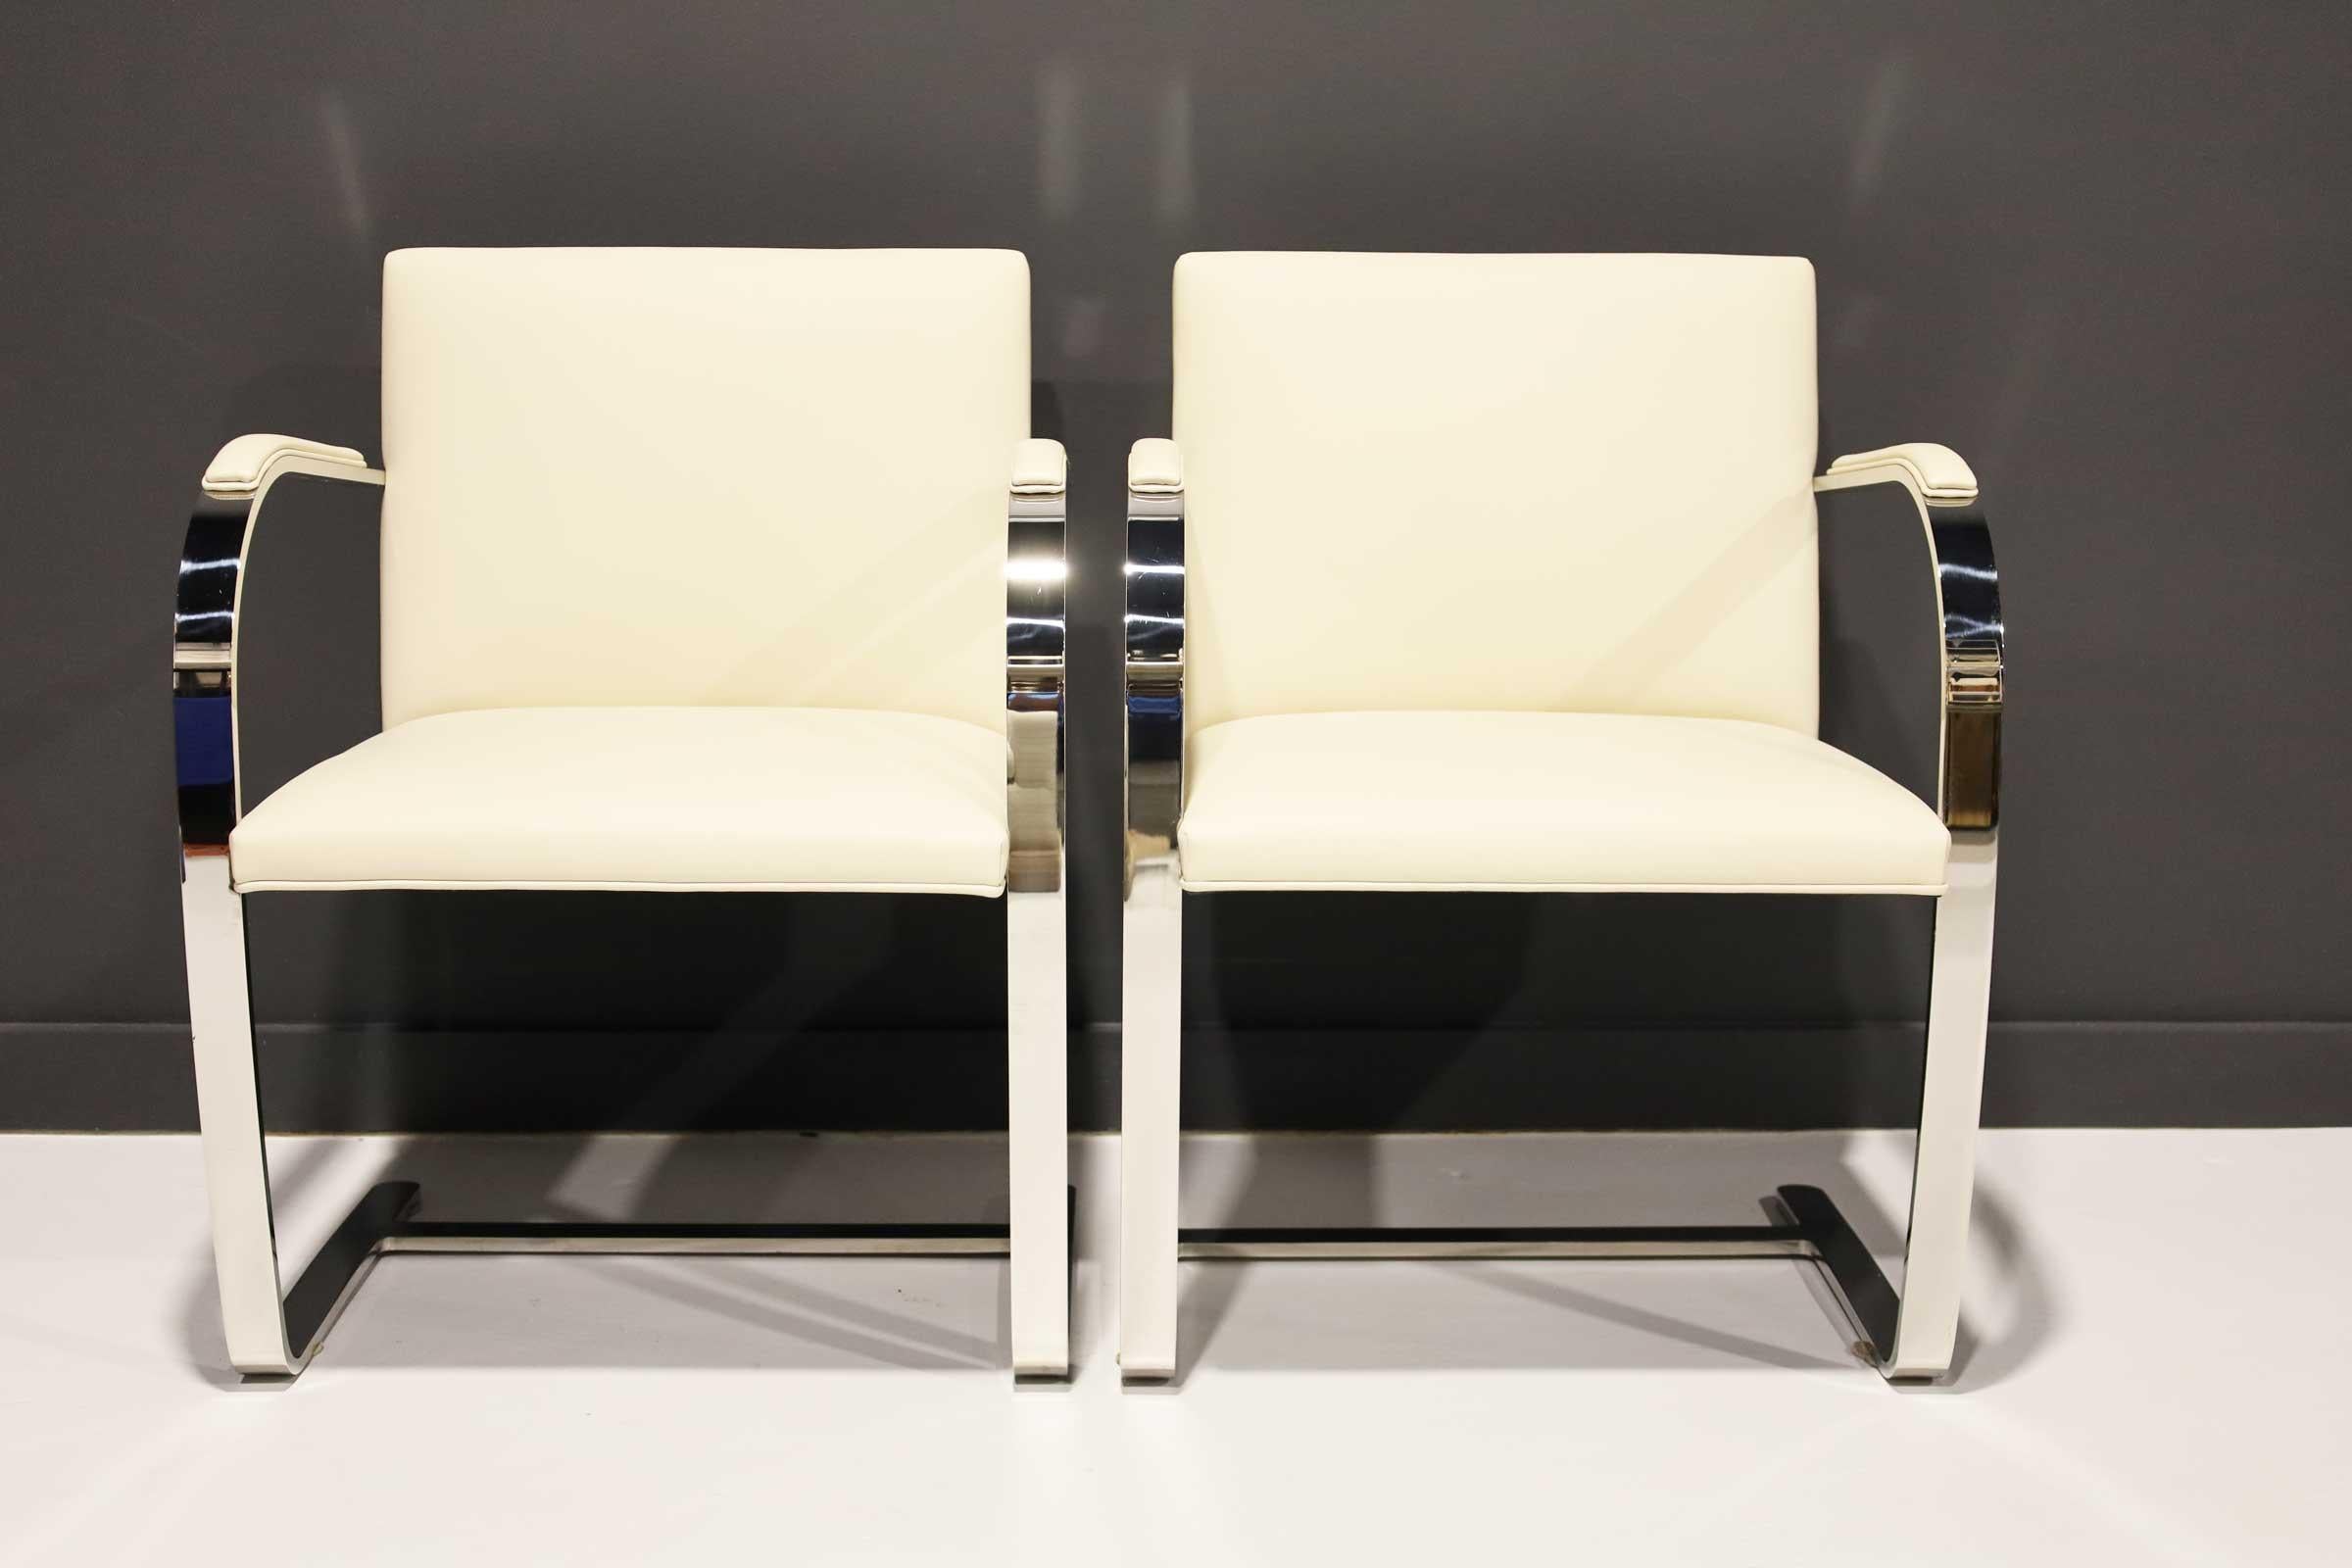 The iconic Brno Chair by Mies van der Rohe for Knoll. This is a nearly new pair of chairs in high-quality off-white Acqua leather with arm pads. These are polished stainless steel as opposed to the chromed steel. Much stronger quality. These are